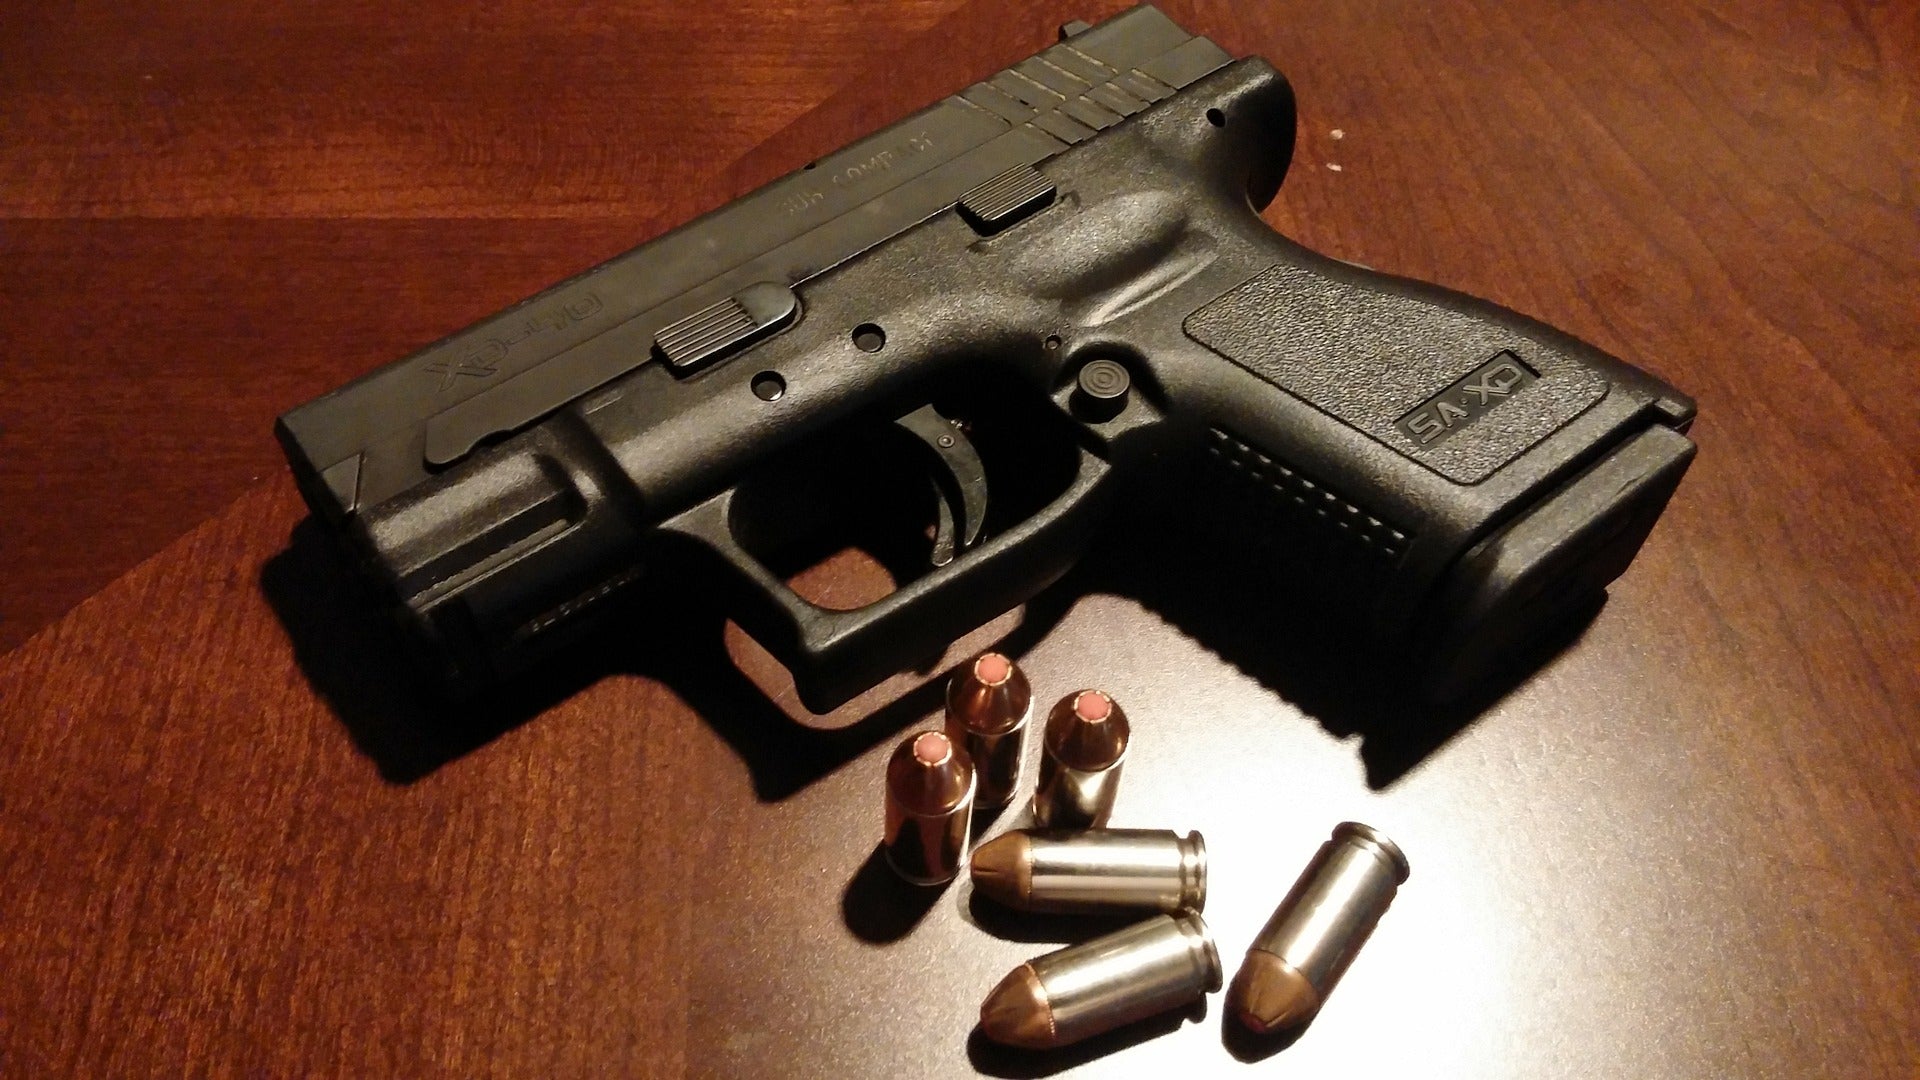 Handgun Safes: Designed To Prevent Gun Accidents in Your Home